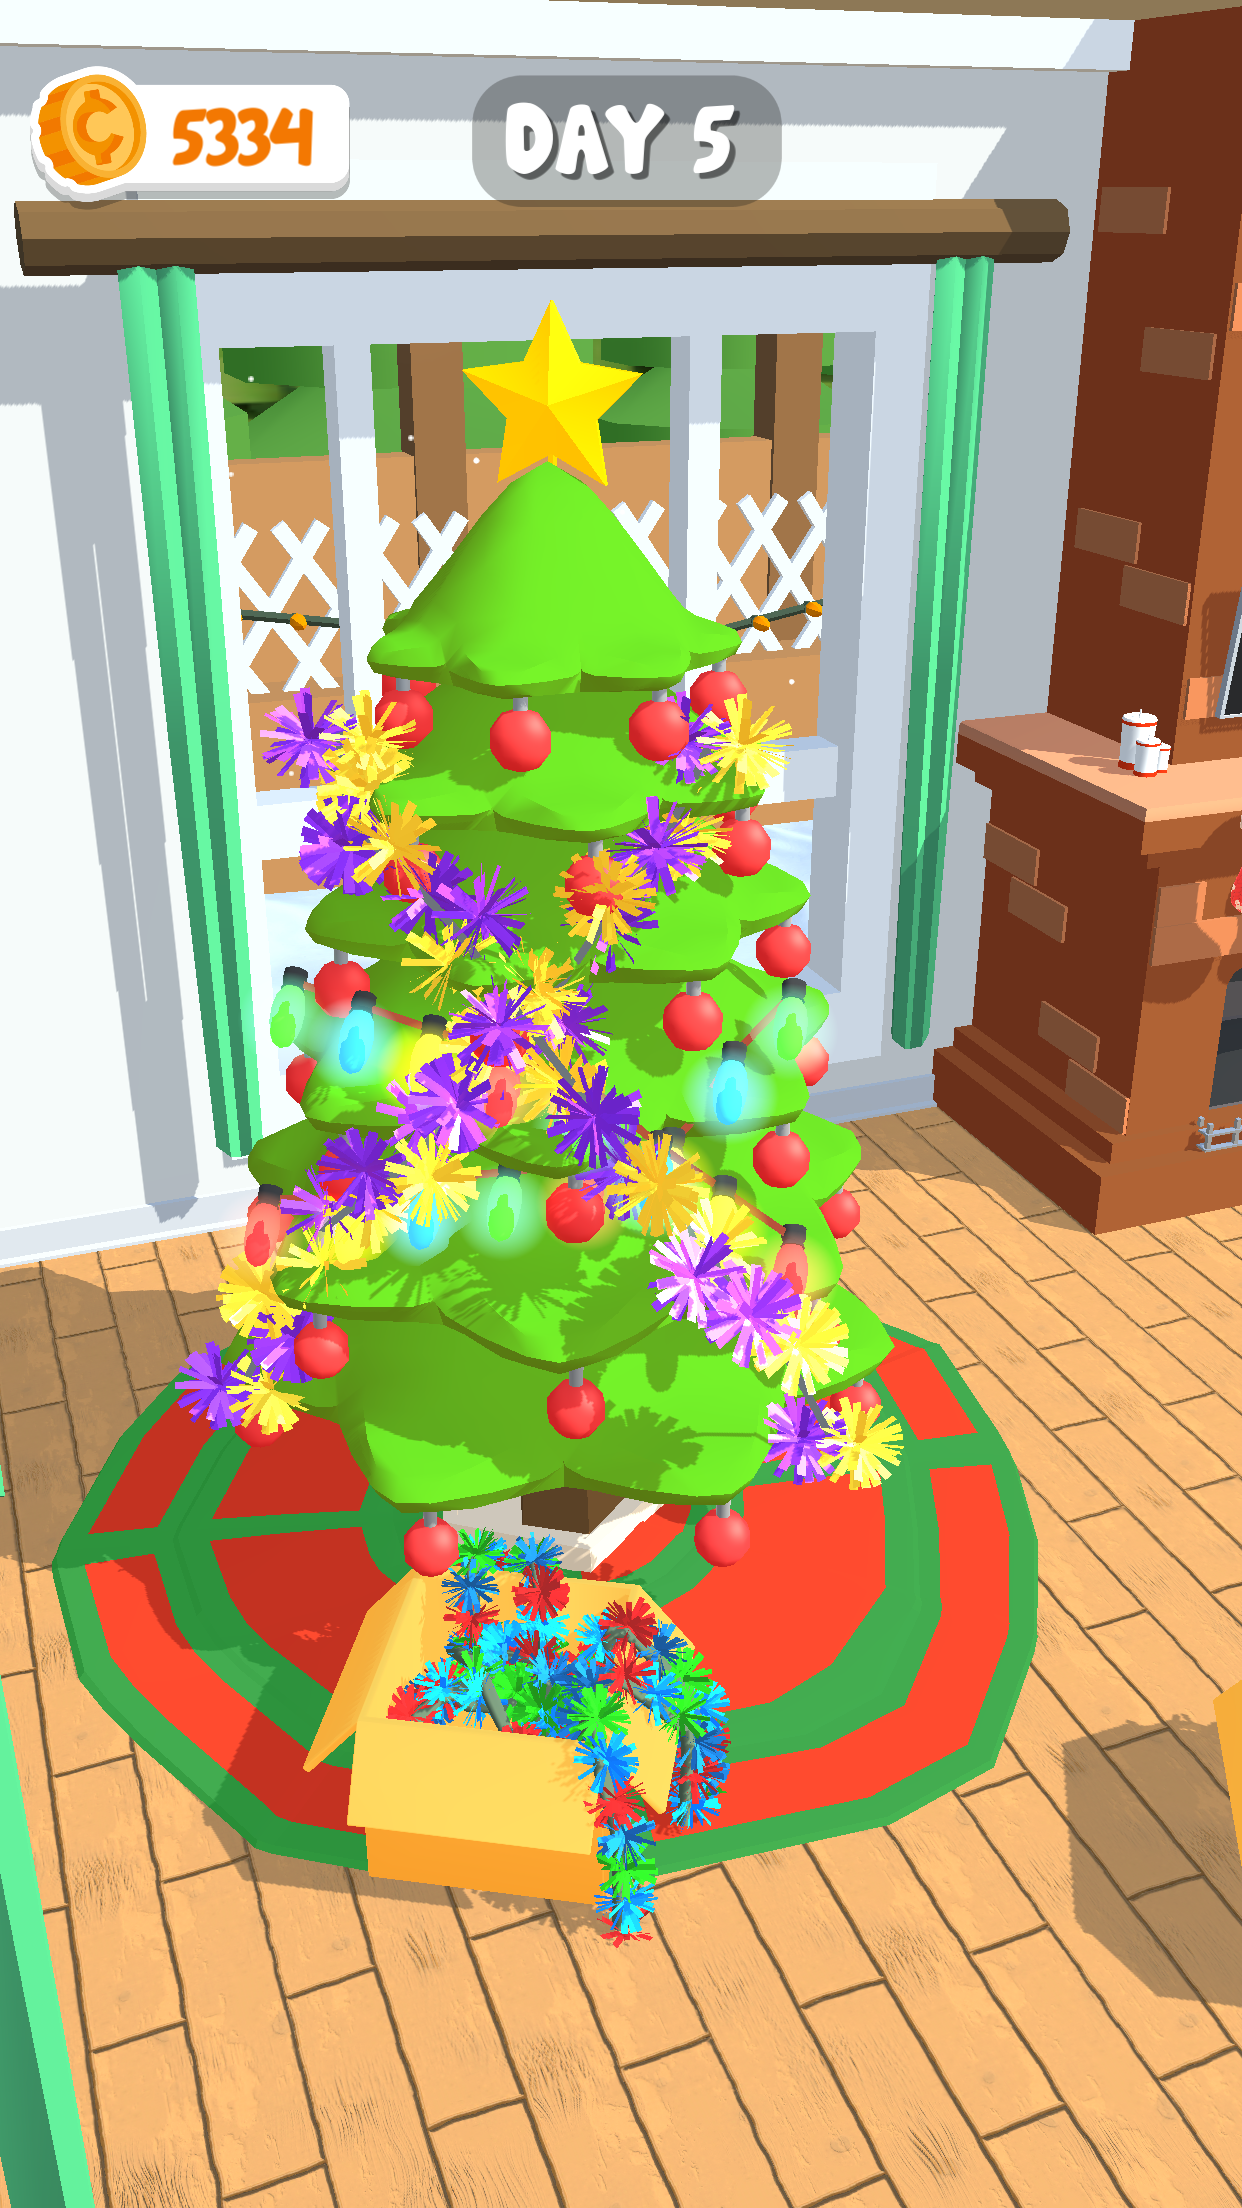 Screenshot 1 of Holiday Home 3D 1.78